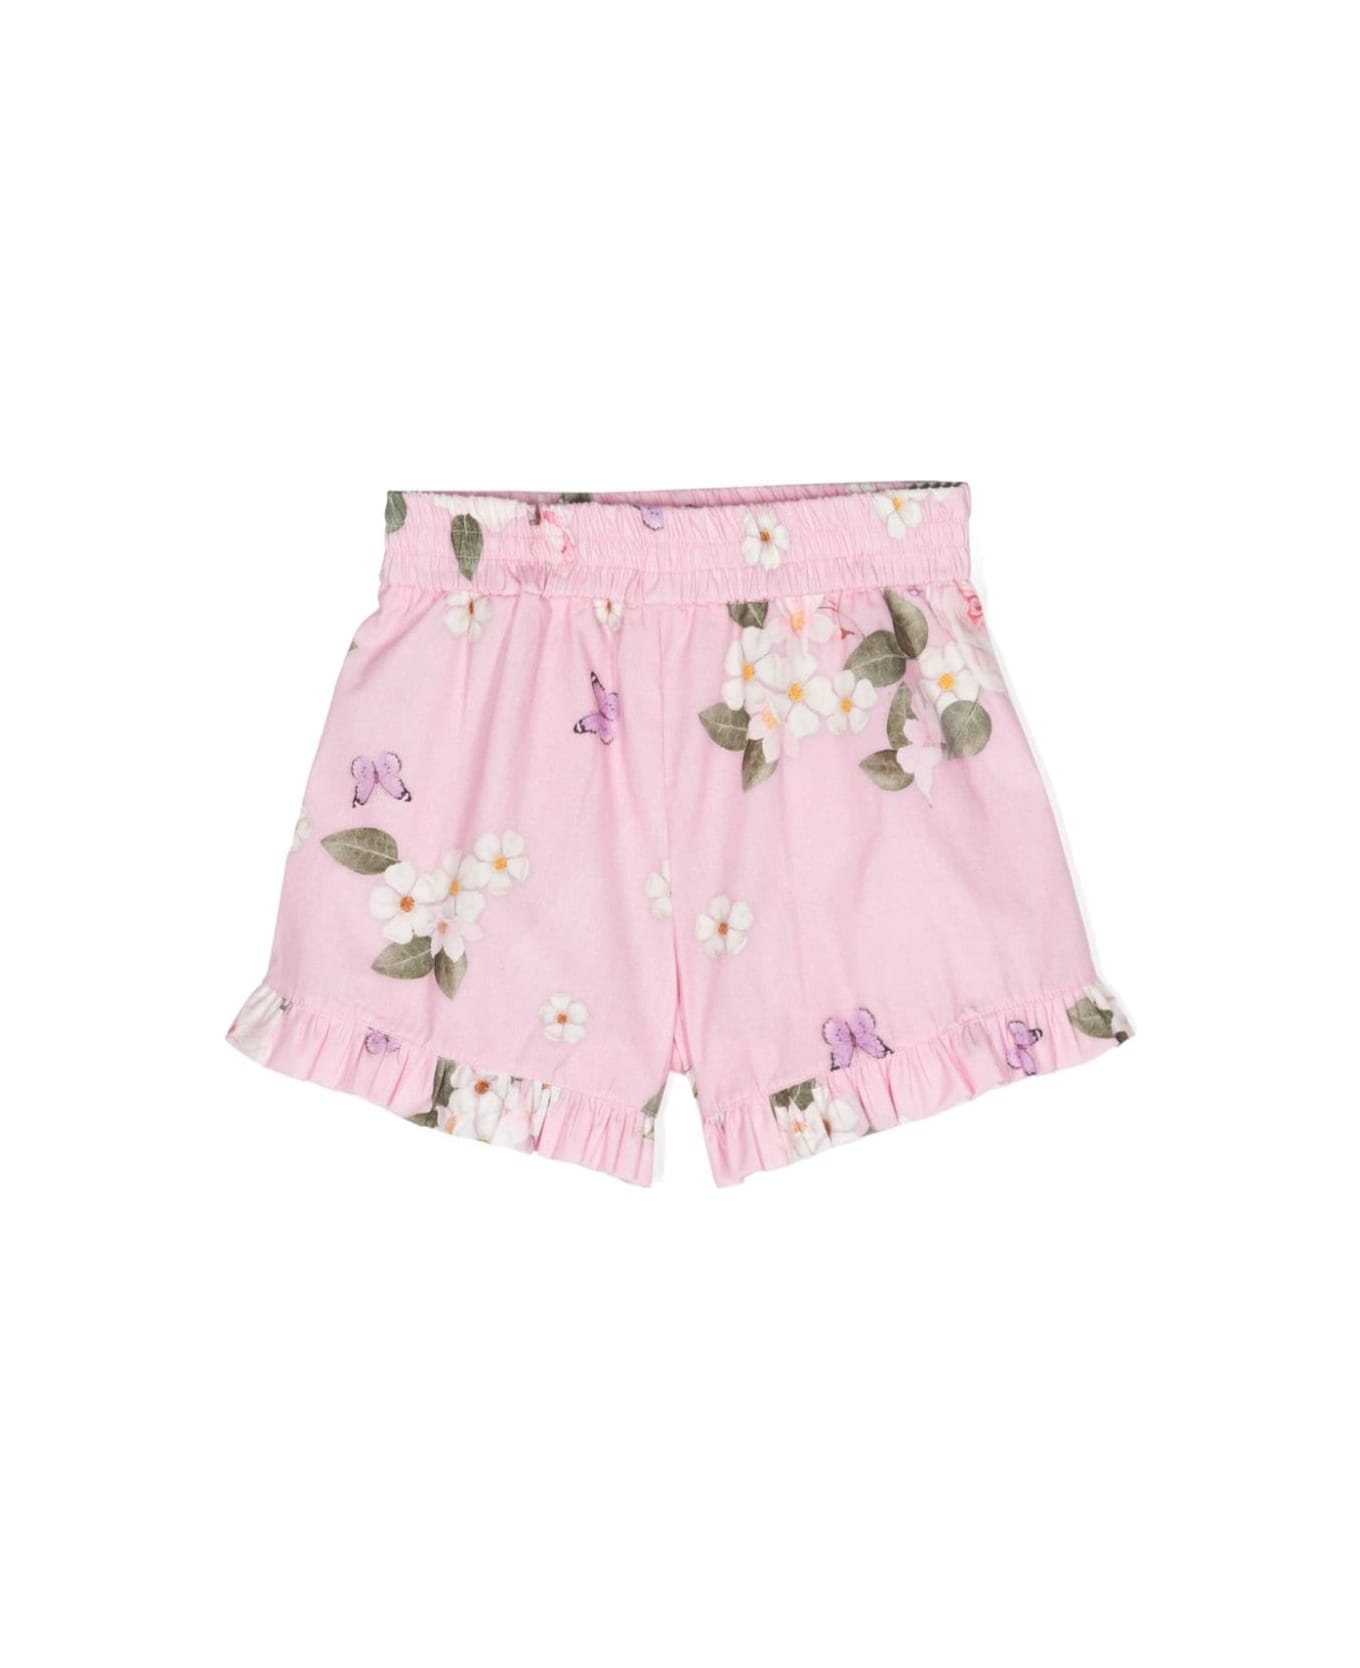 Monnalisa Pink Shorts With Floreal Print And Ruffles In Cotton Girl - Pink